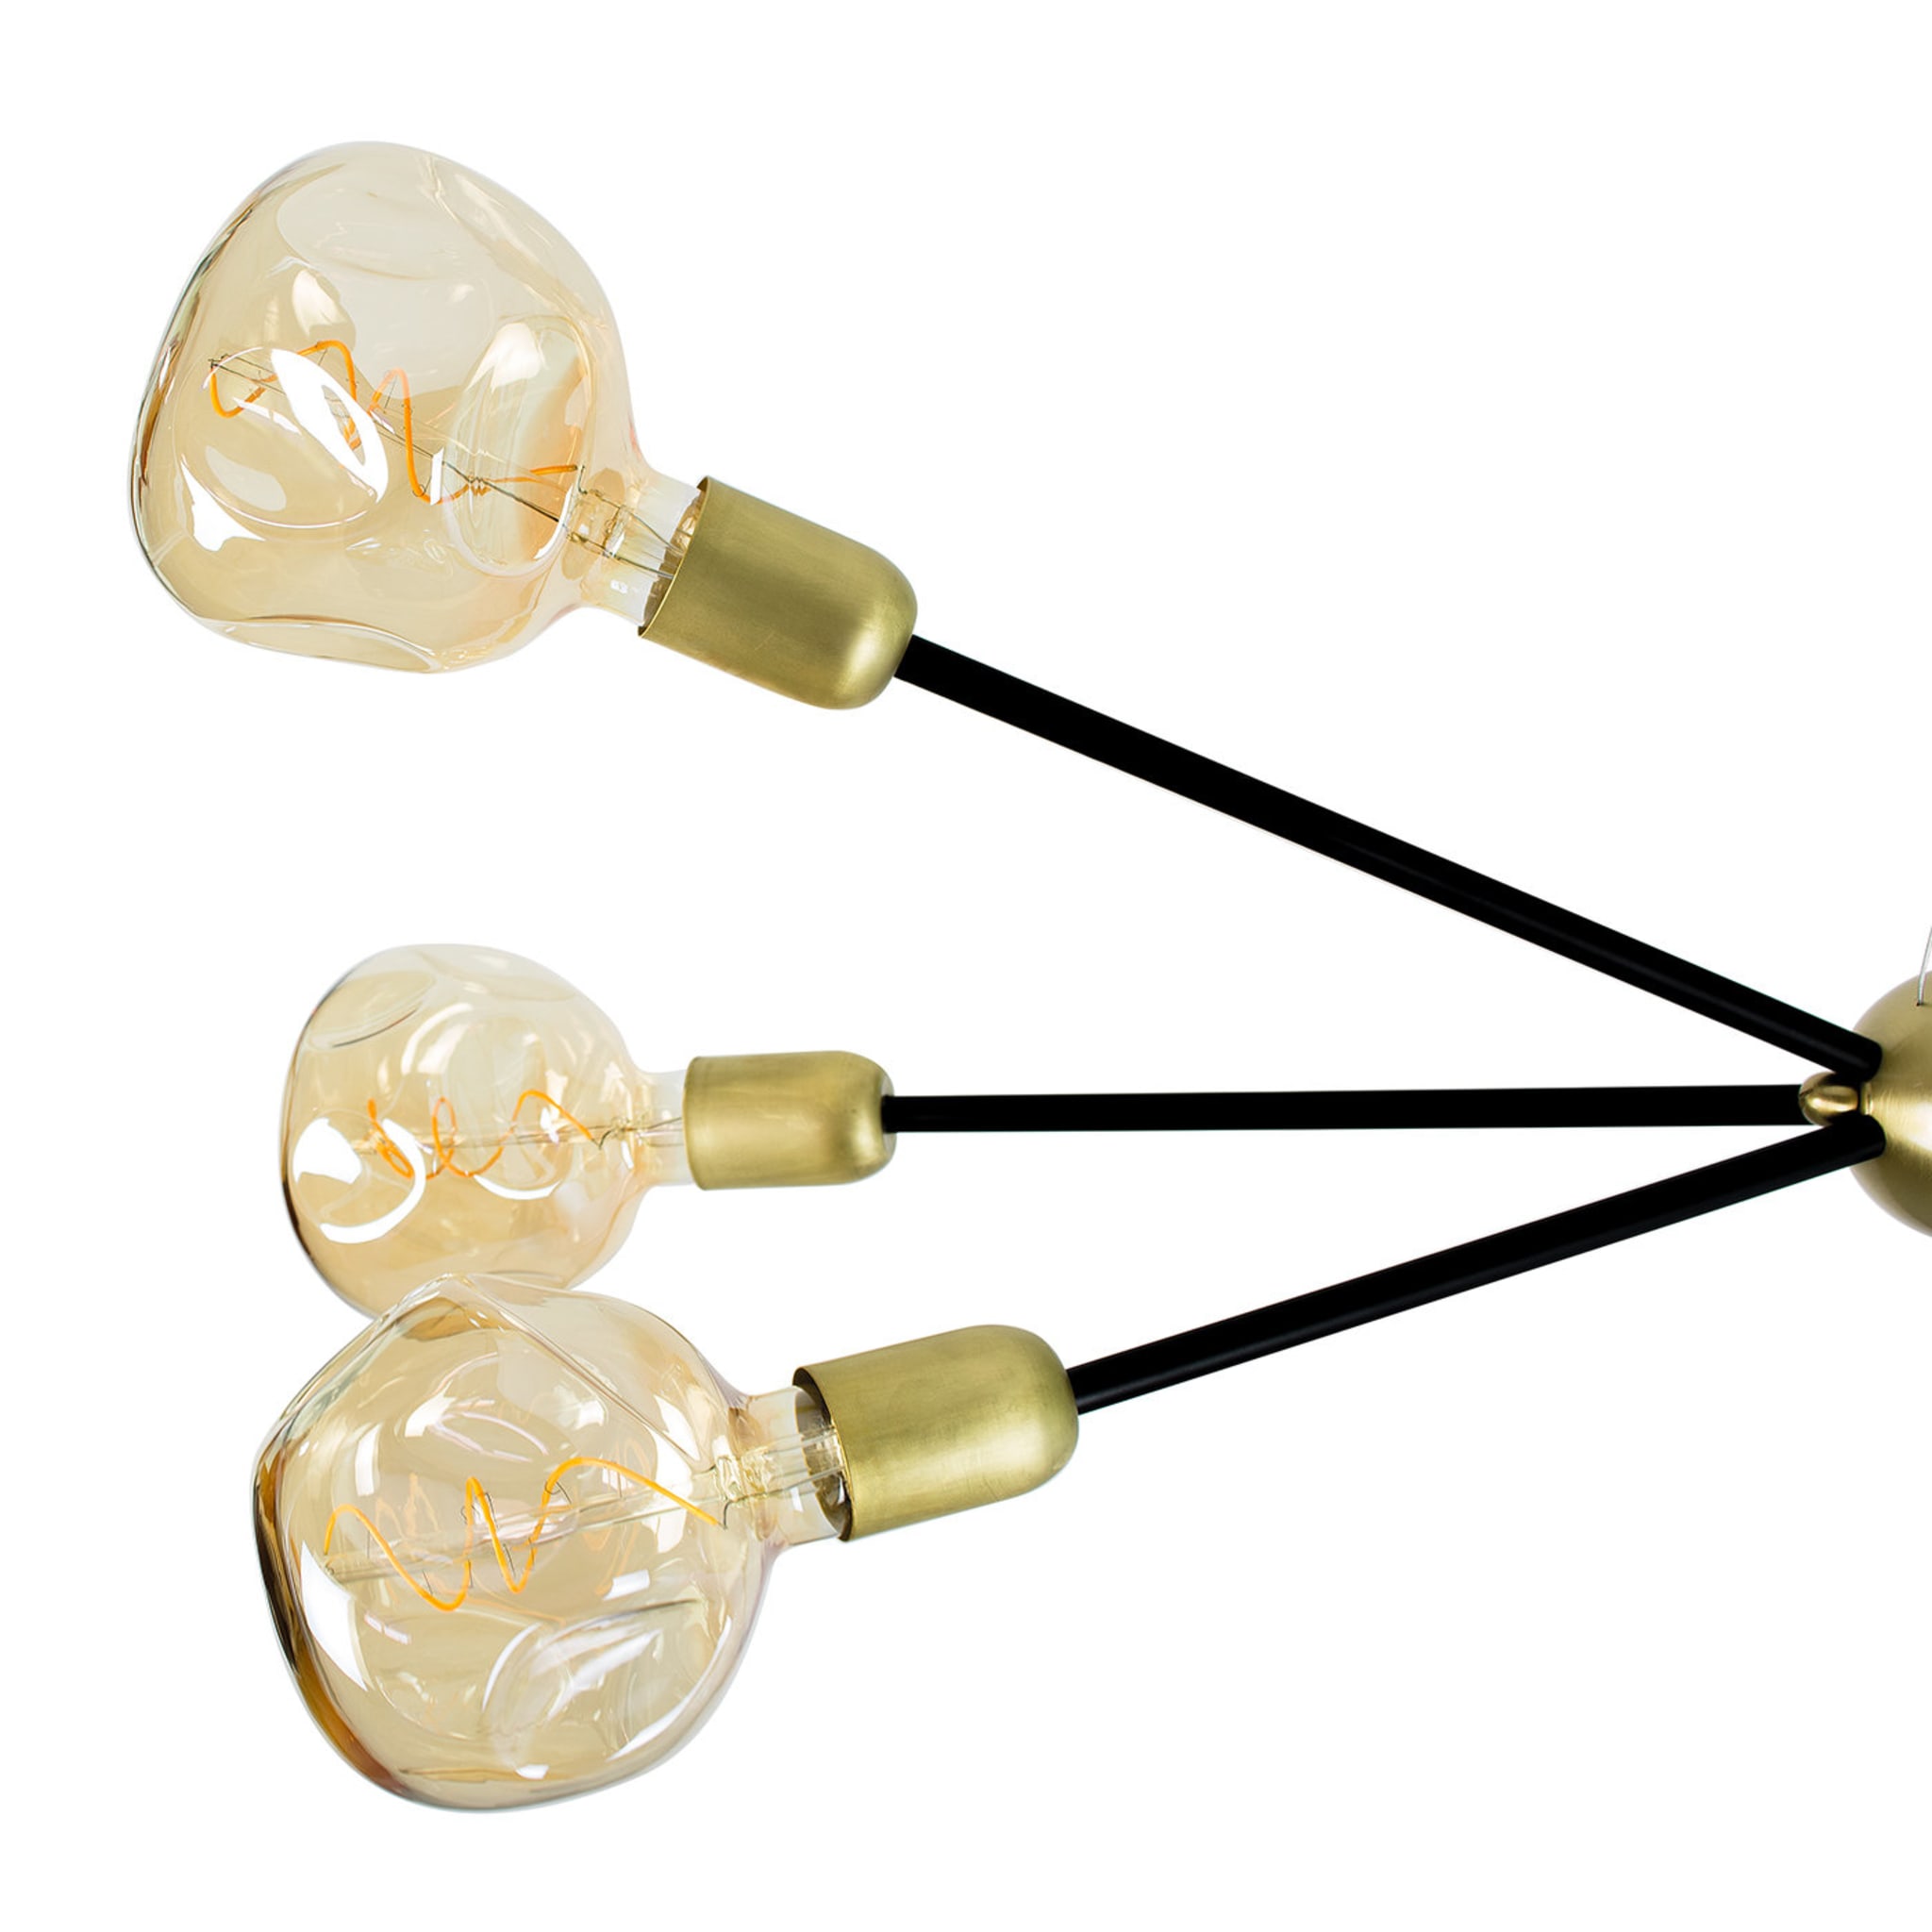 Sciangai/S Ceiling Lamp with G125 Twist Amb Bulbs - Alternative view 1